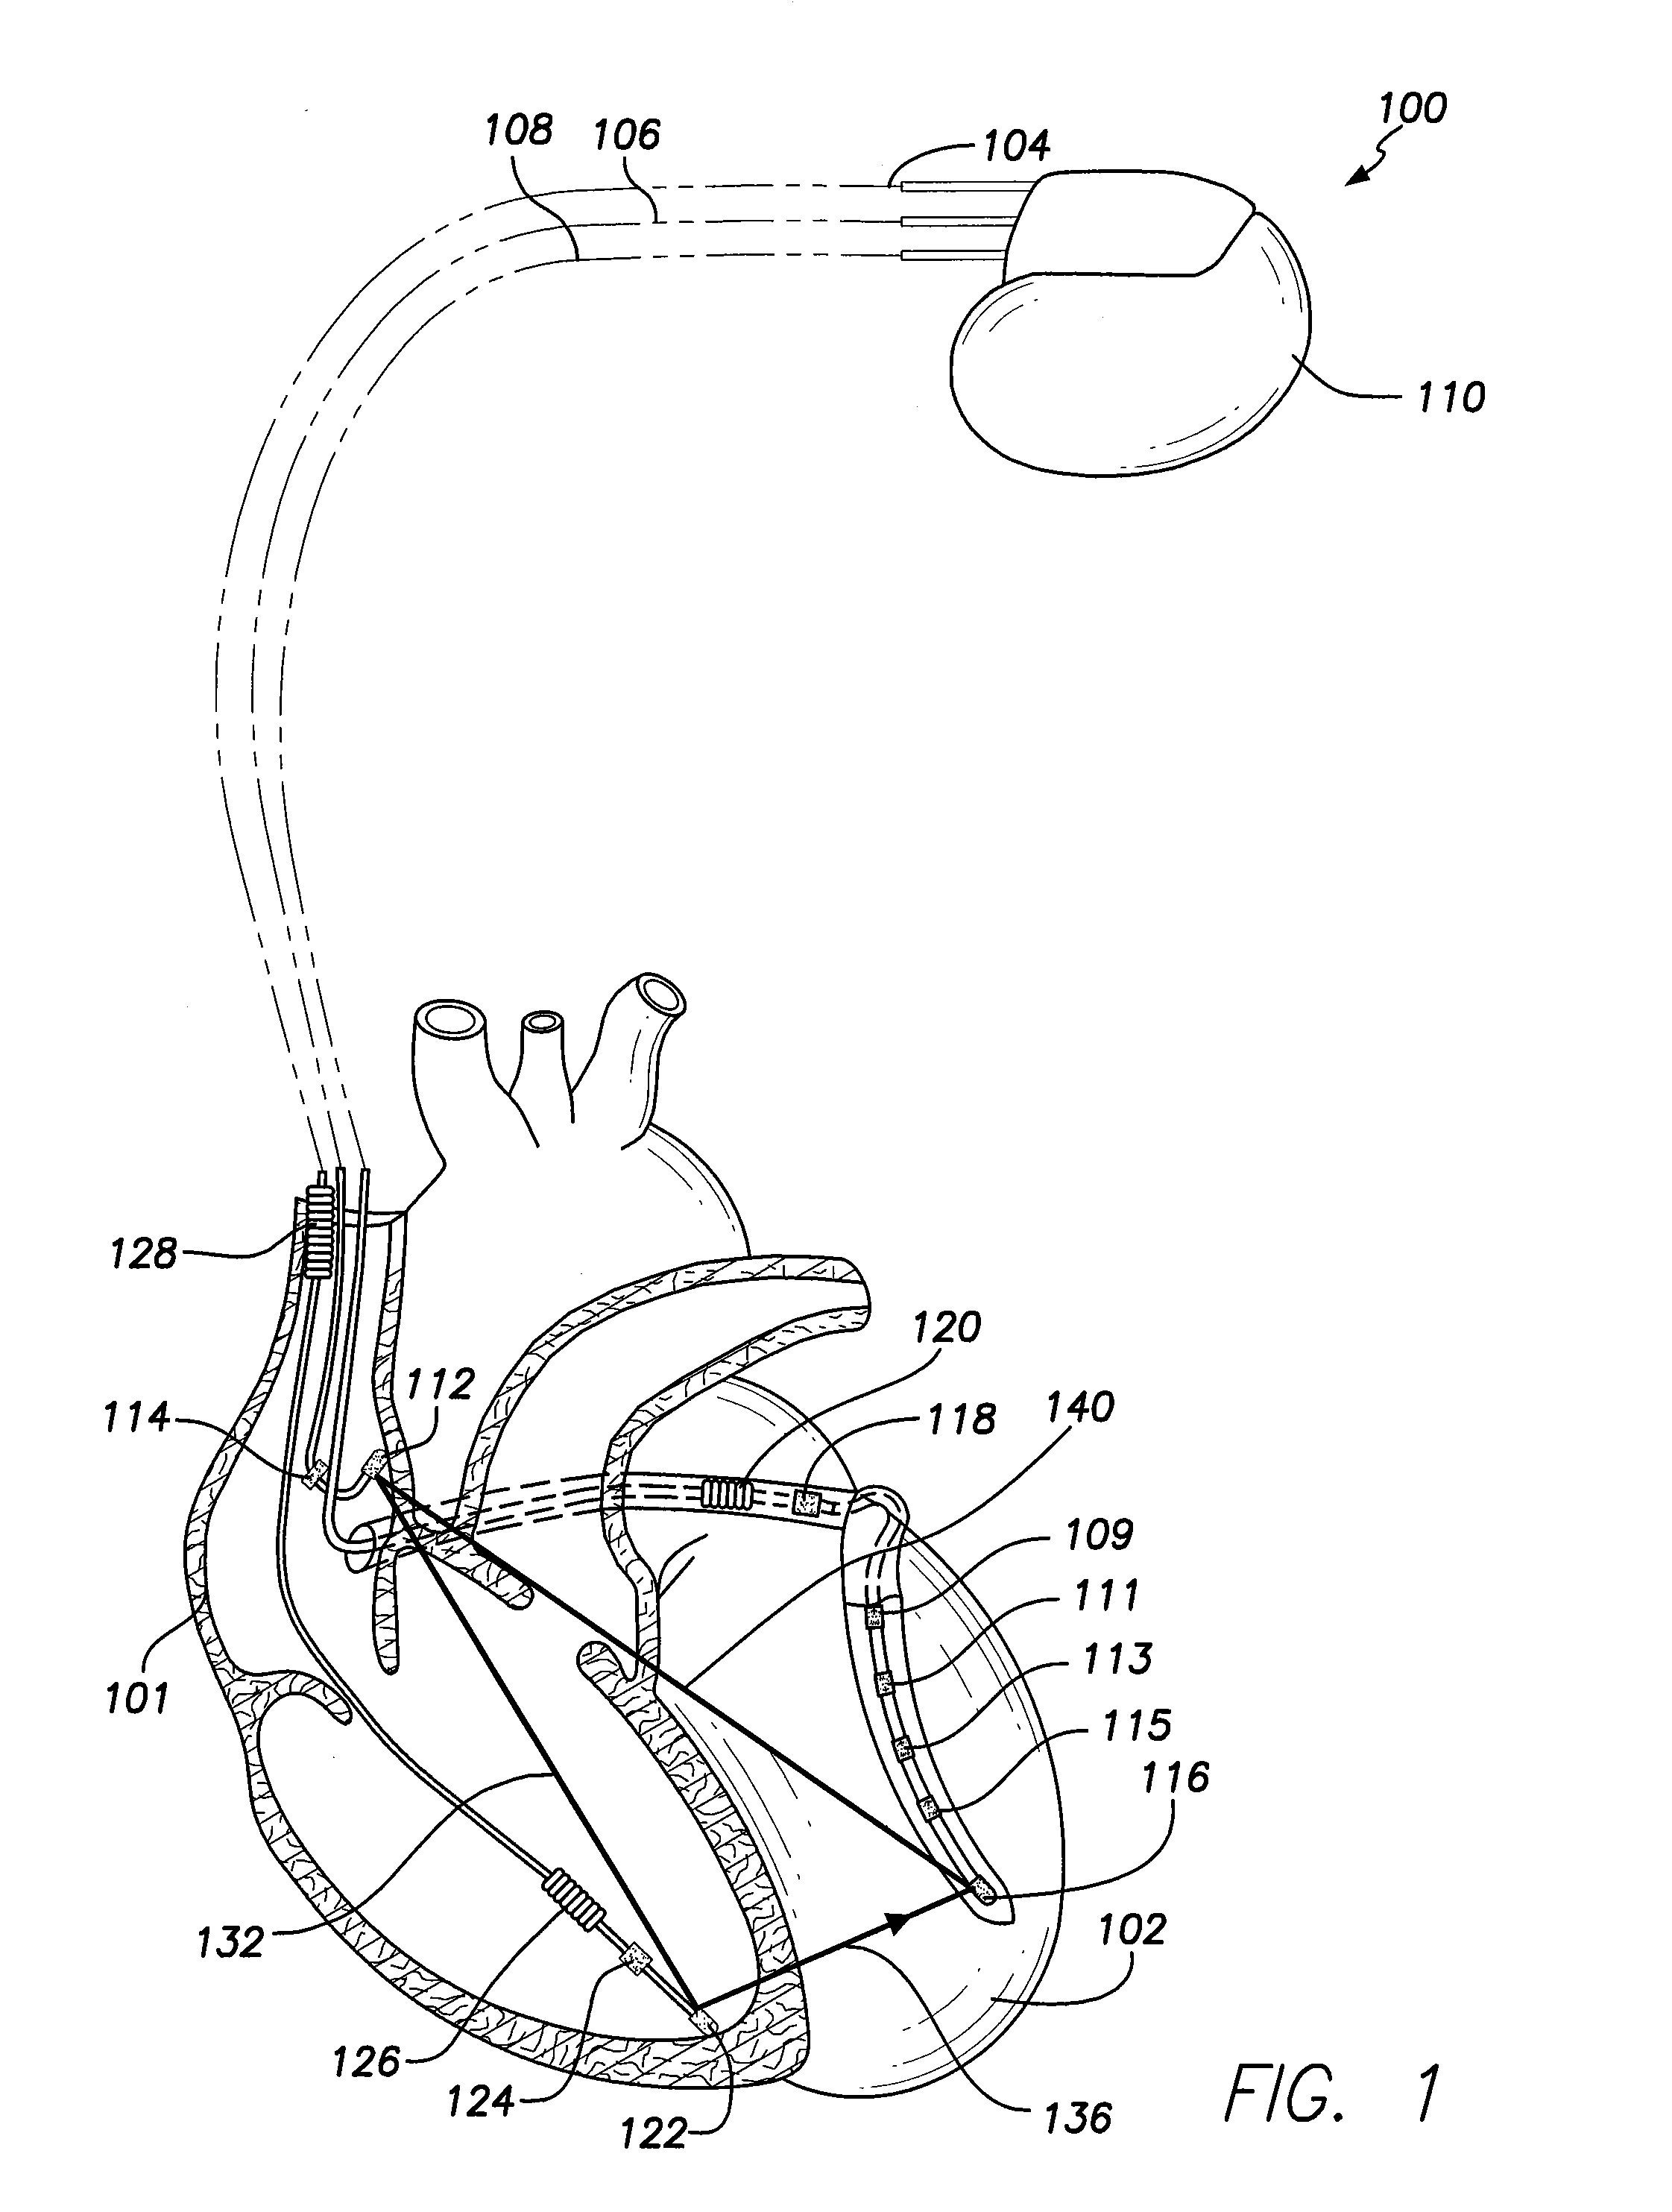 Methods and systems for determining pacing parameters based on repolarization index